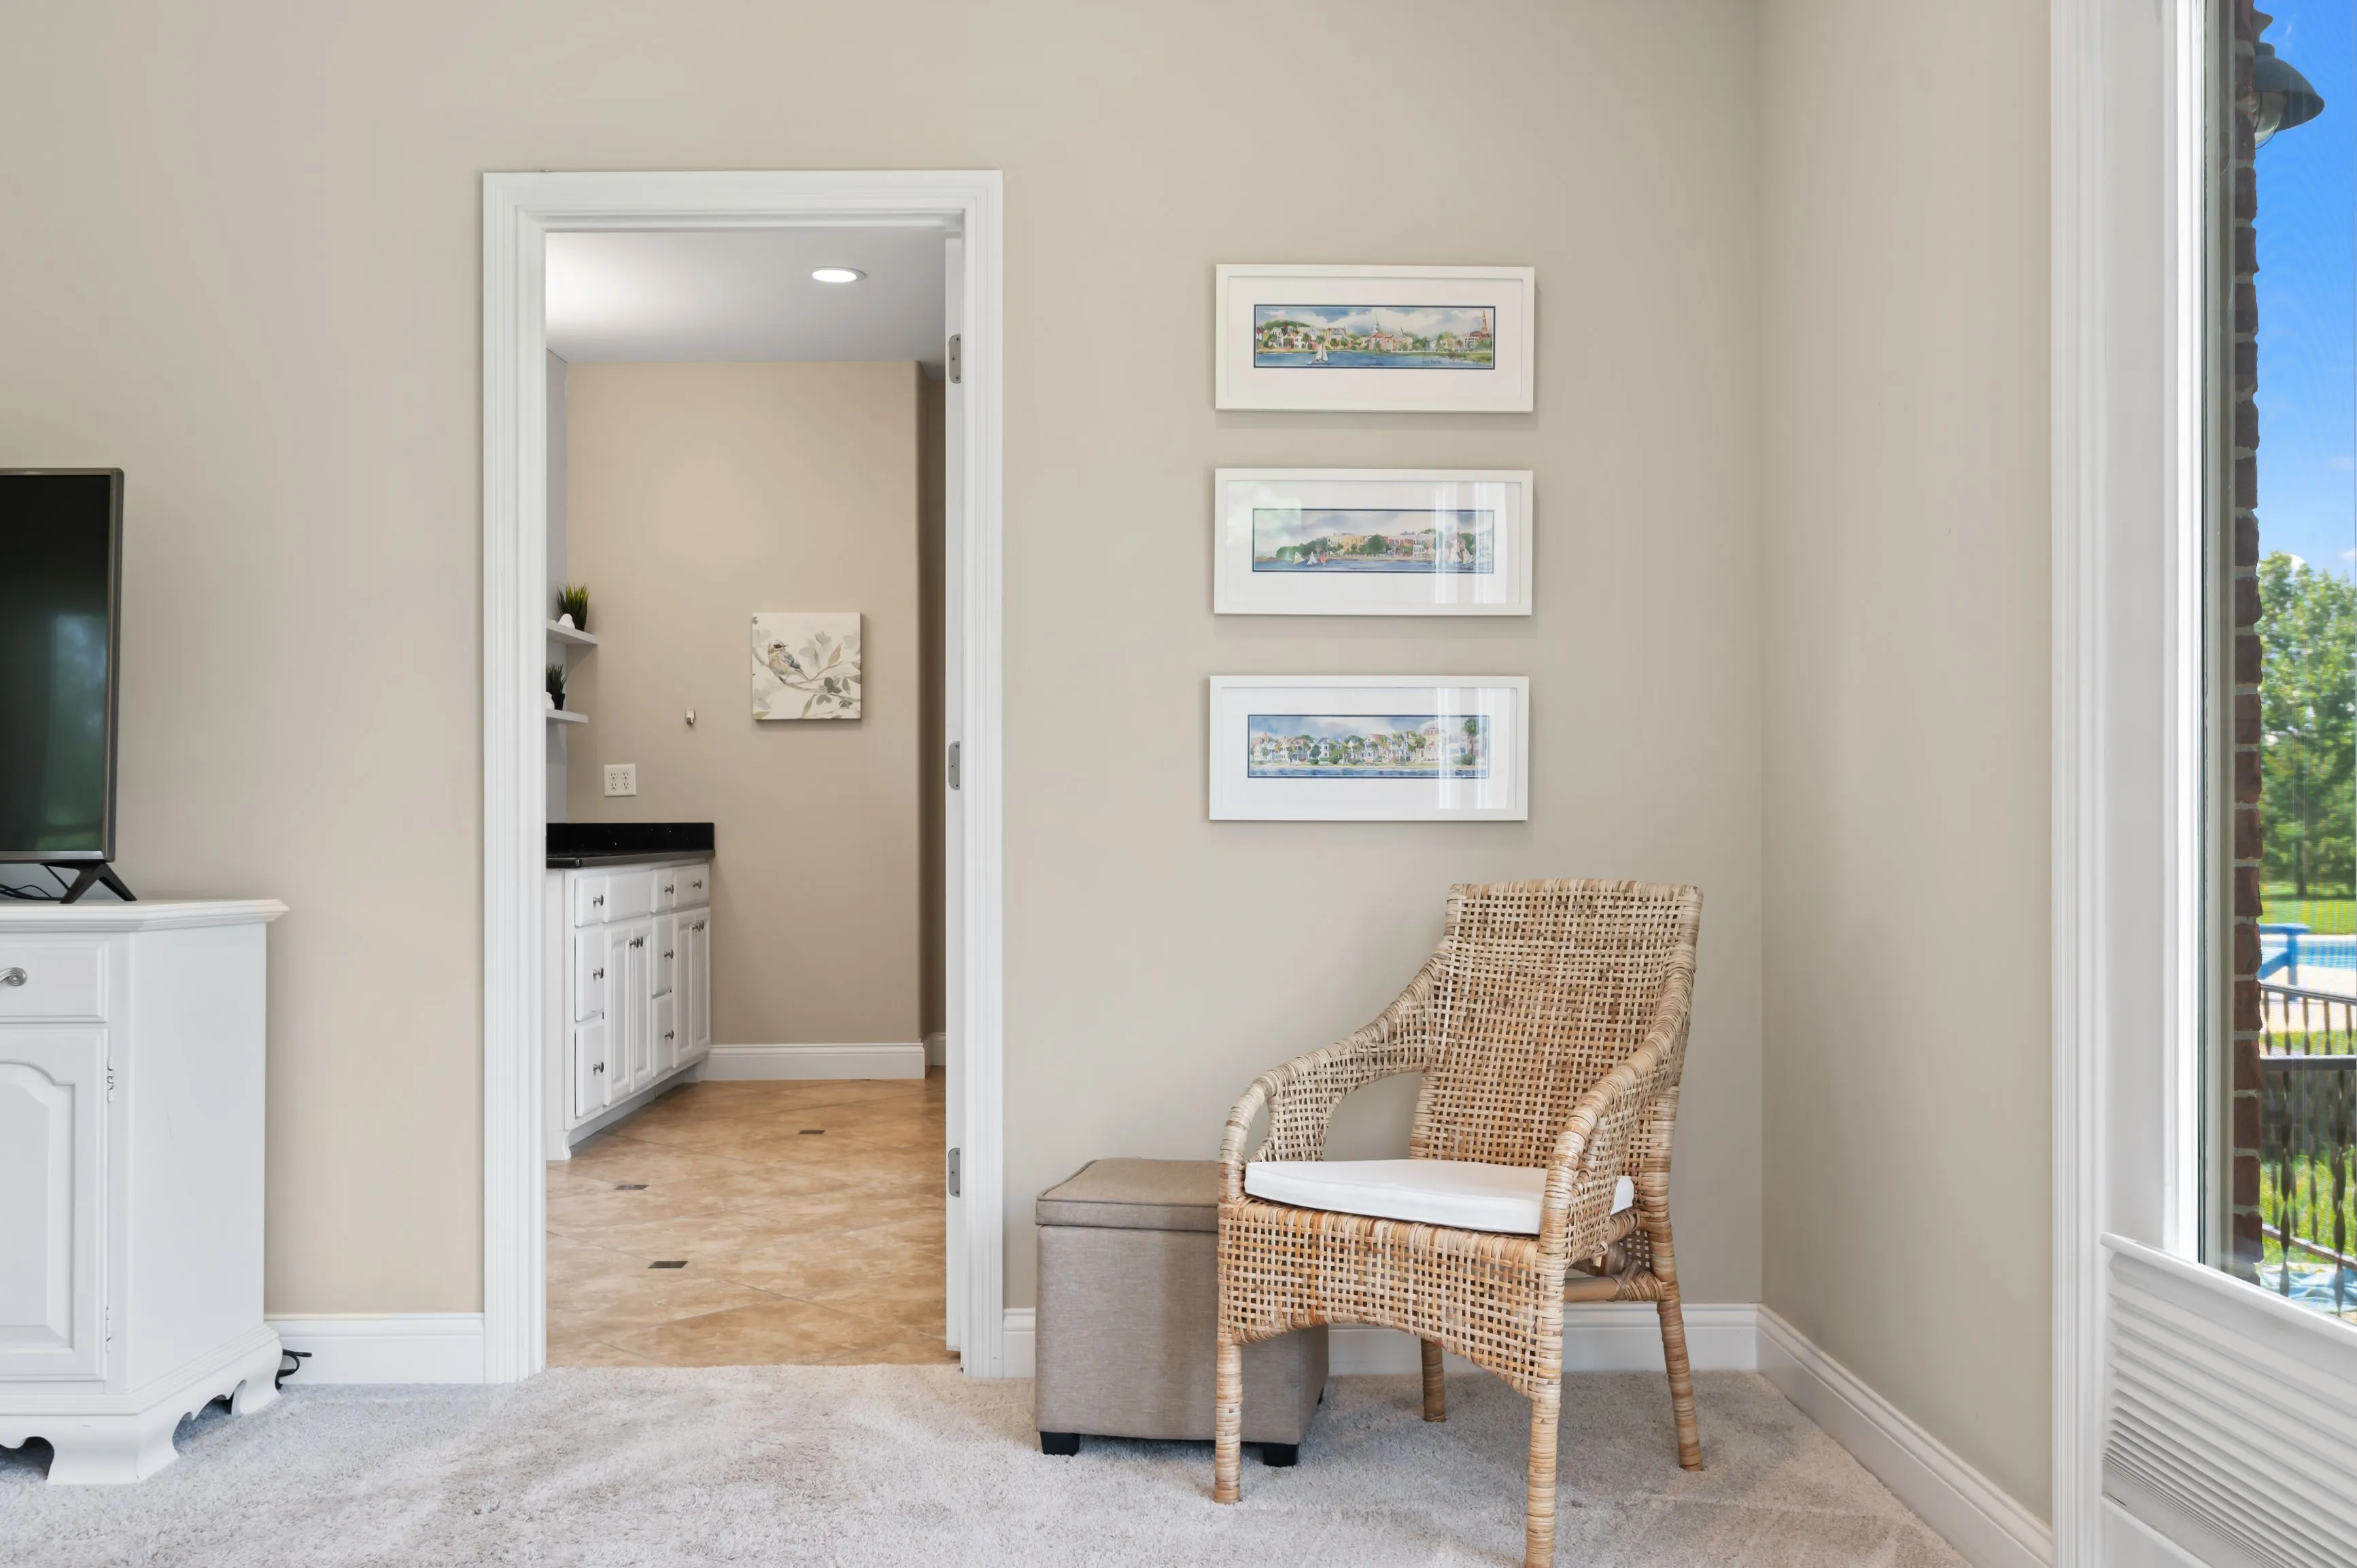 A modern hallway with beige walls, featuring a wicker bench, framed pictures on the wall, and an open door leading to another room.